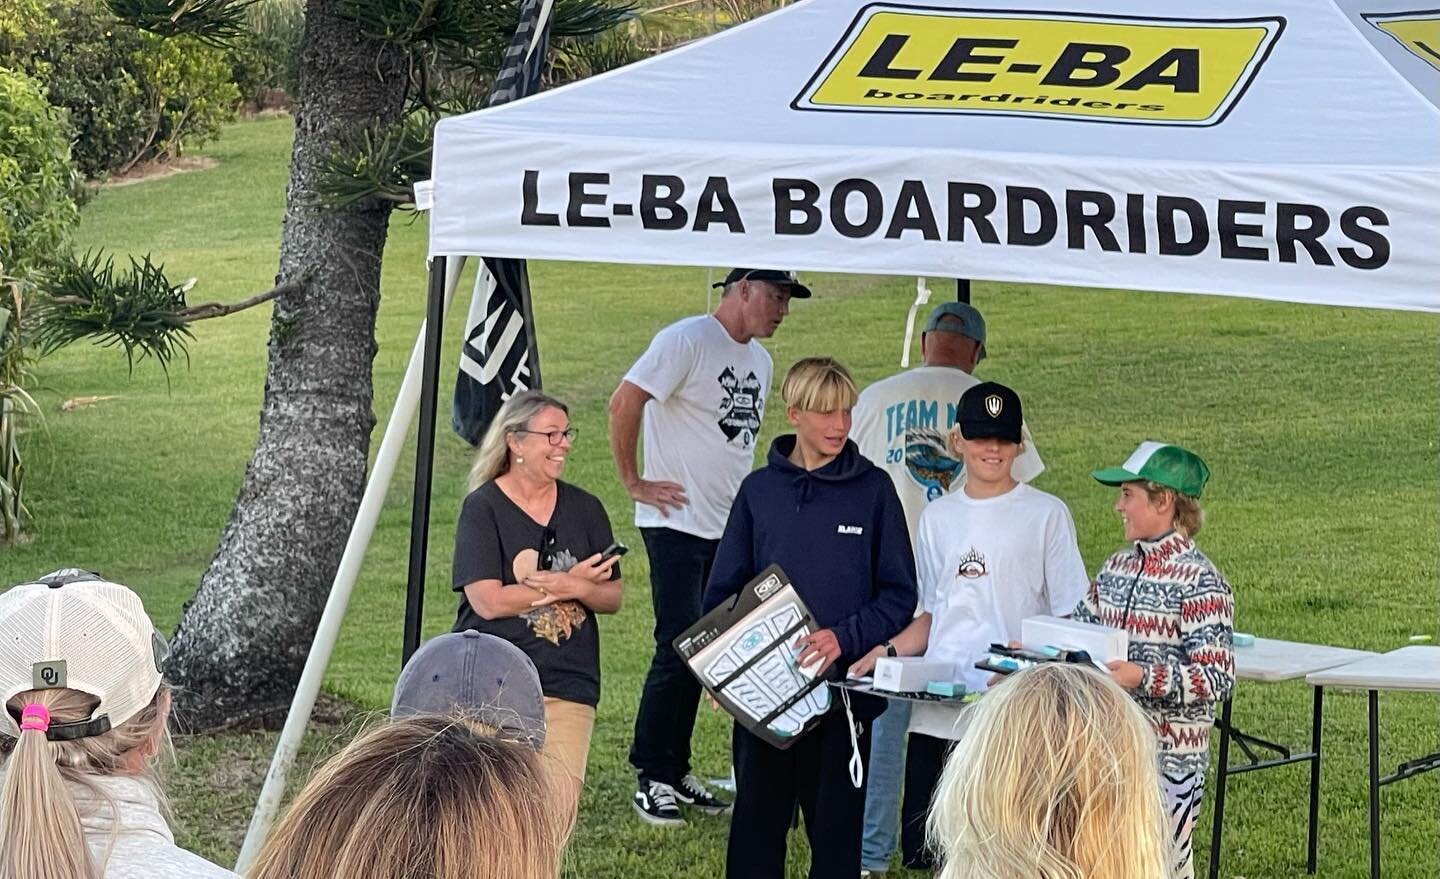 Huge day at the 2023 Ocean &amp; Earth Junior Regional Titles. Big thanks to @lebaboardriders for running the event in pumping waves at Lennox Head. Great Job!  3rd Place Boys U16 to @macbrindley, 3rd Place Girls U18 @wyana.p, 1st Place Girls U14 @ma